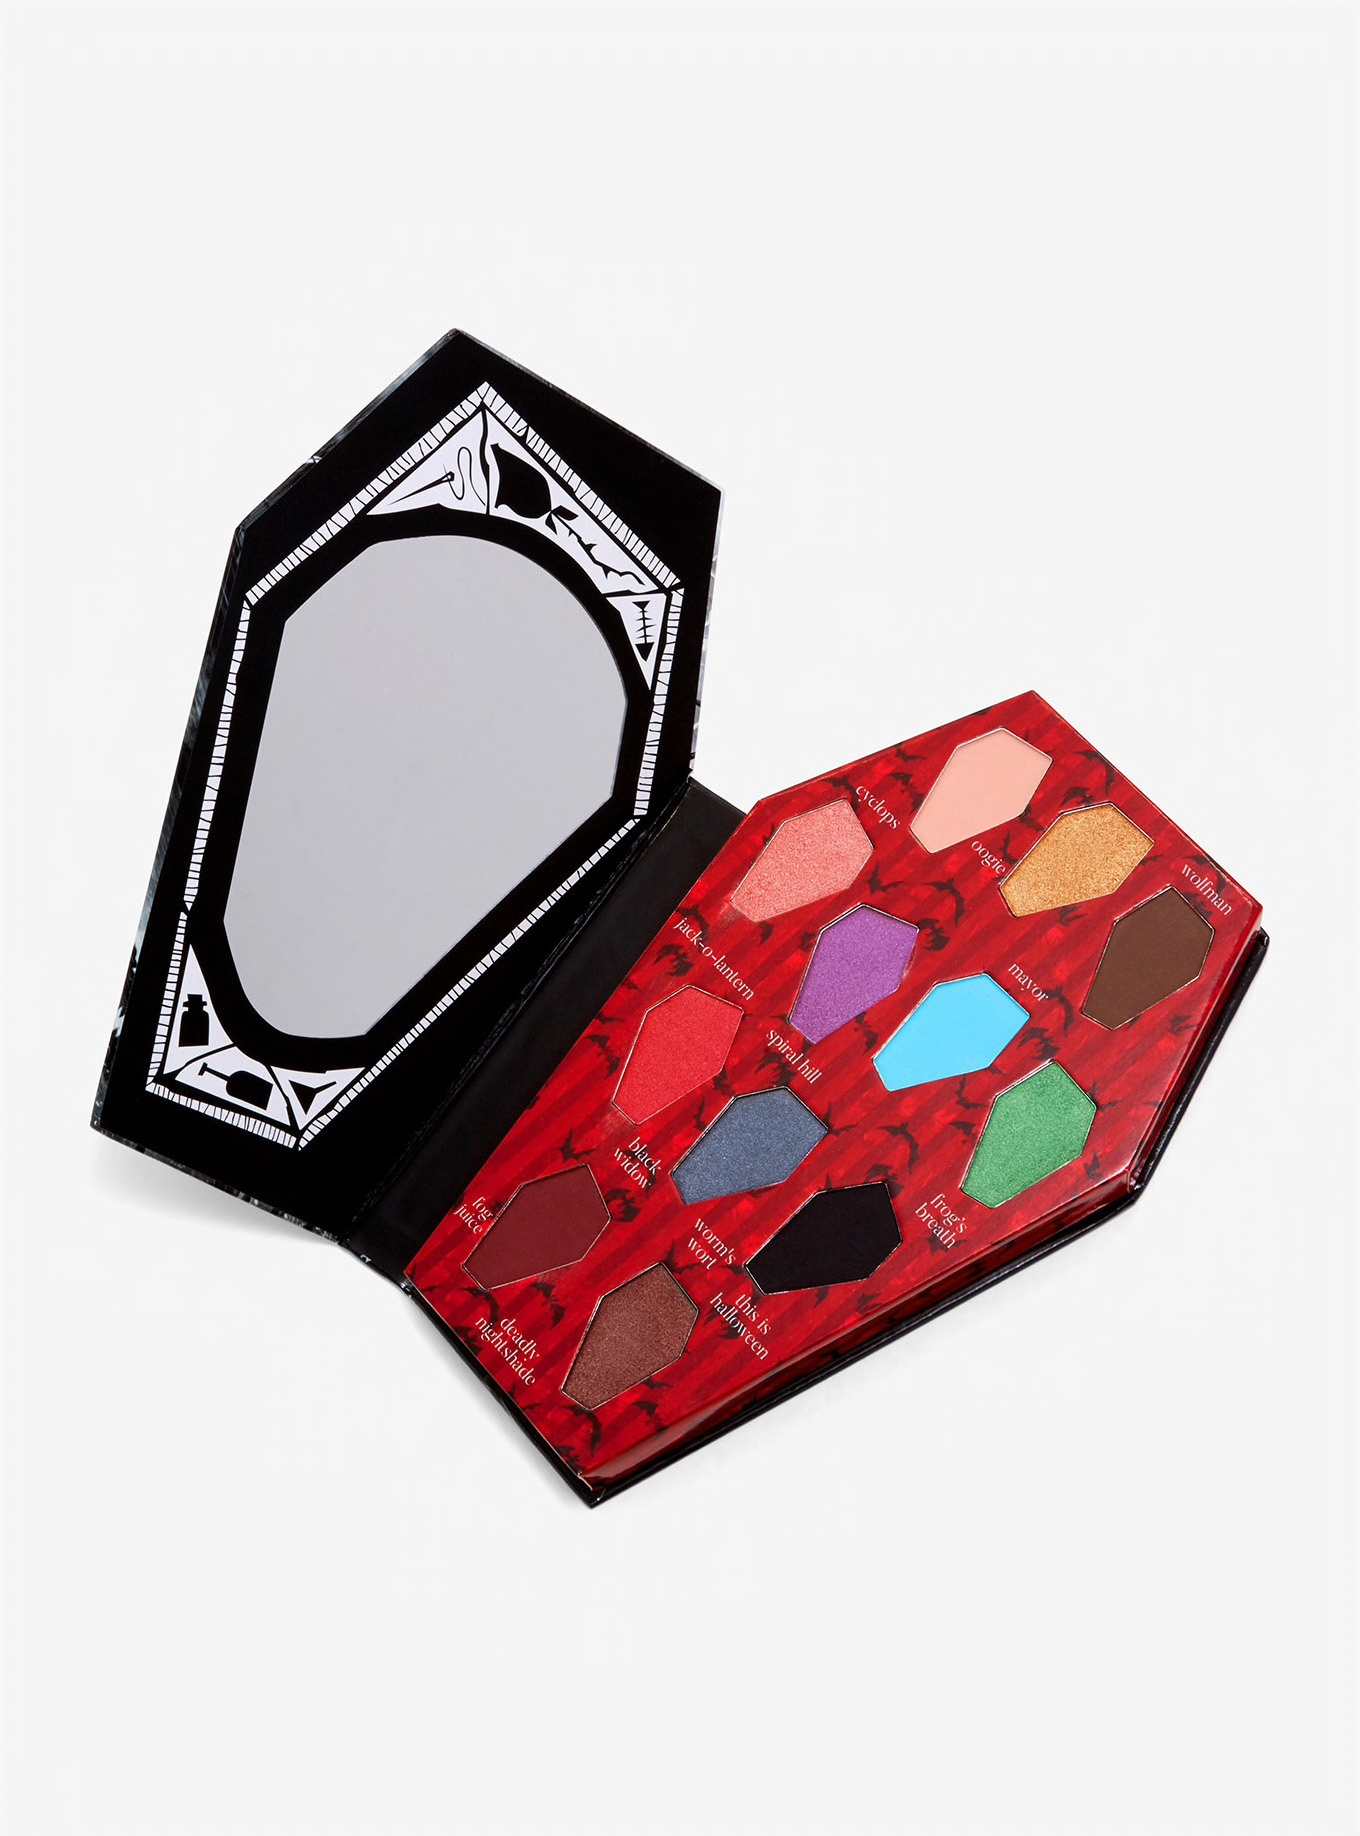 THE NIGHTMARE BEFORE CHRISTMAS MASTER OF FRIGHT EYESHADOW PALETTE